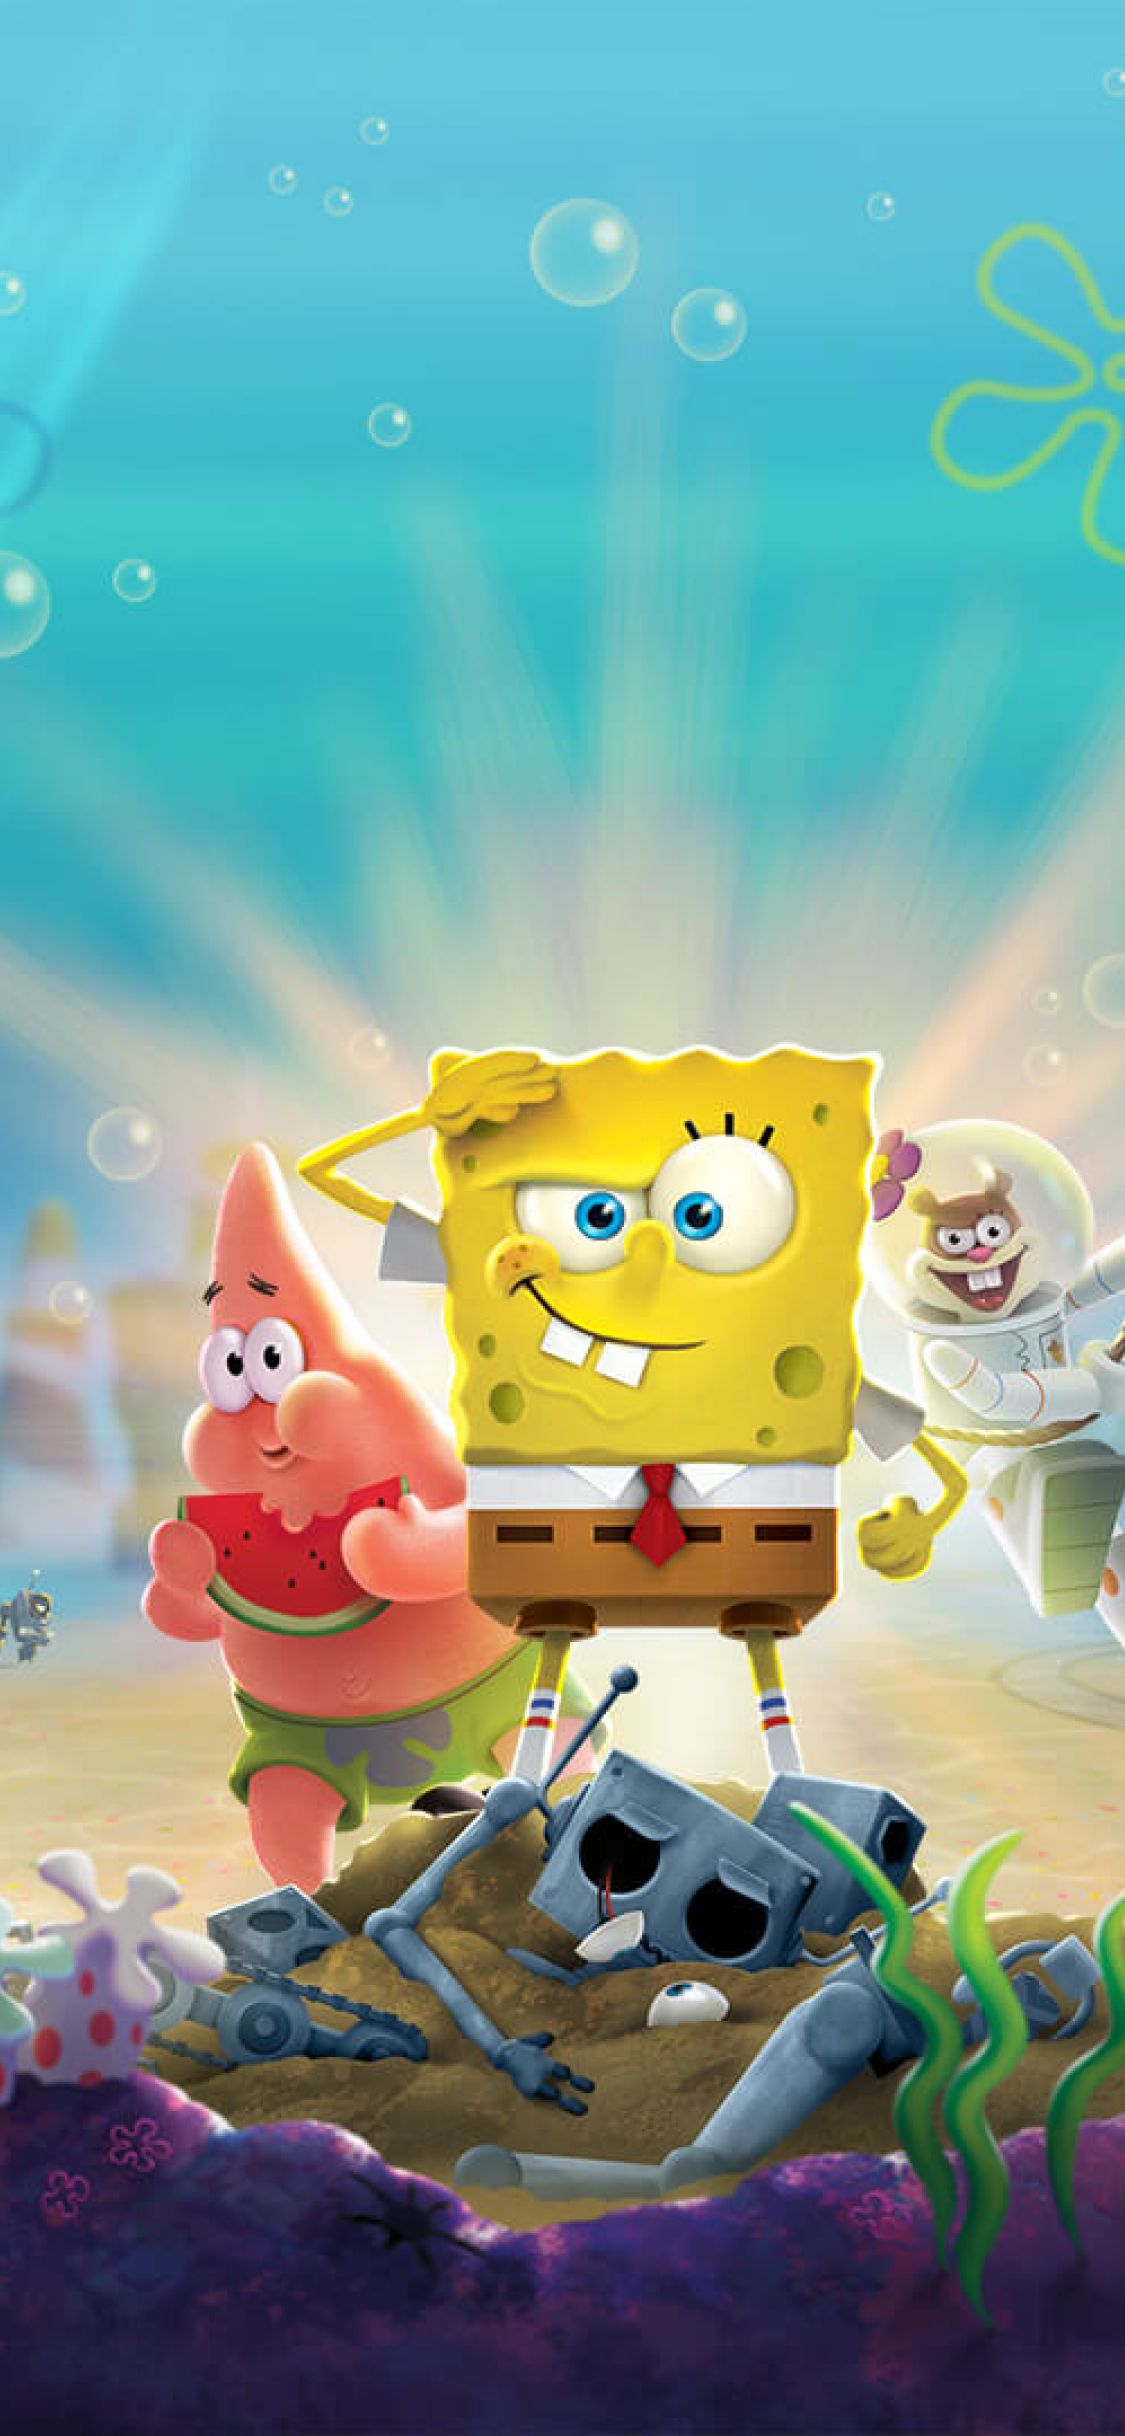 1125x2436 SpongeBob SquarePants Battle for Bikini Bottom Rehydrated Iphone XS,Iphone 10,Iphone X Wallpaper, HD Games 4K Wallpapers, Image, Photos and Backgrounds